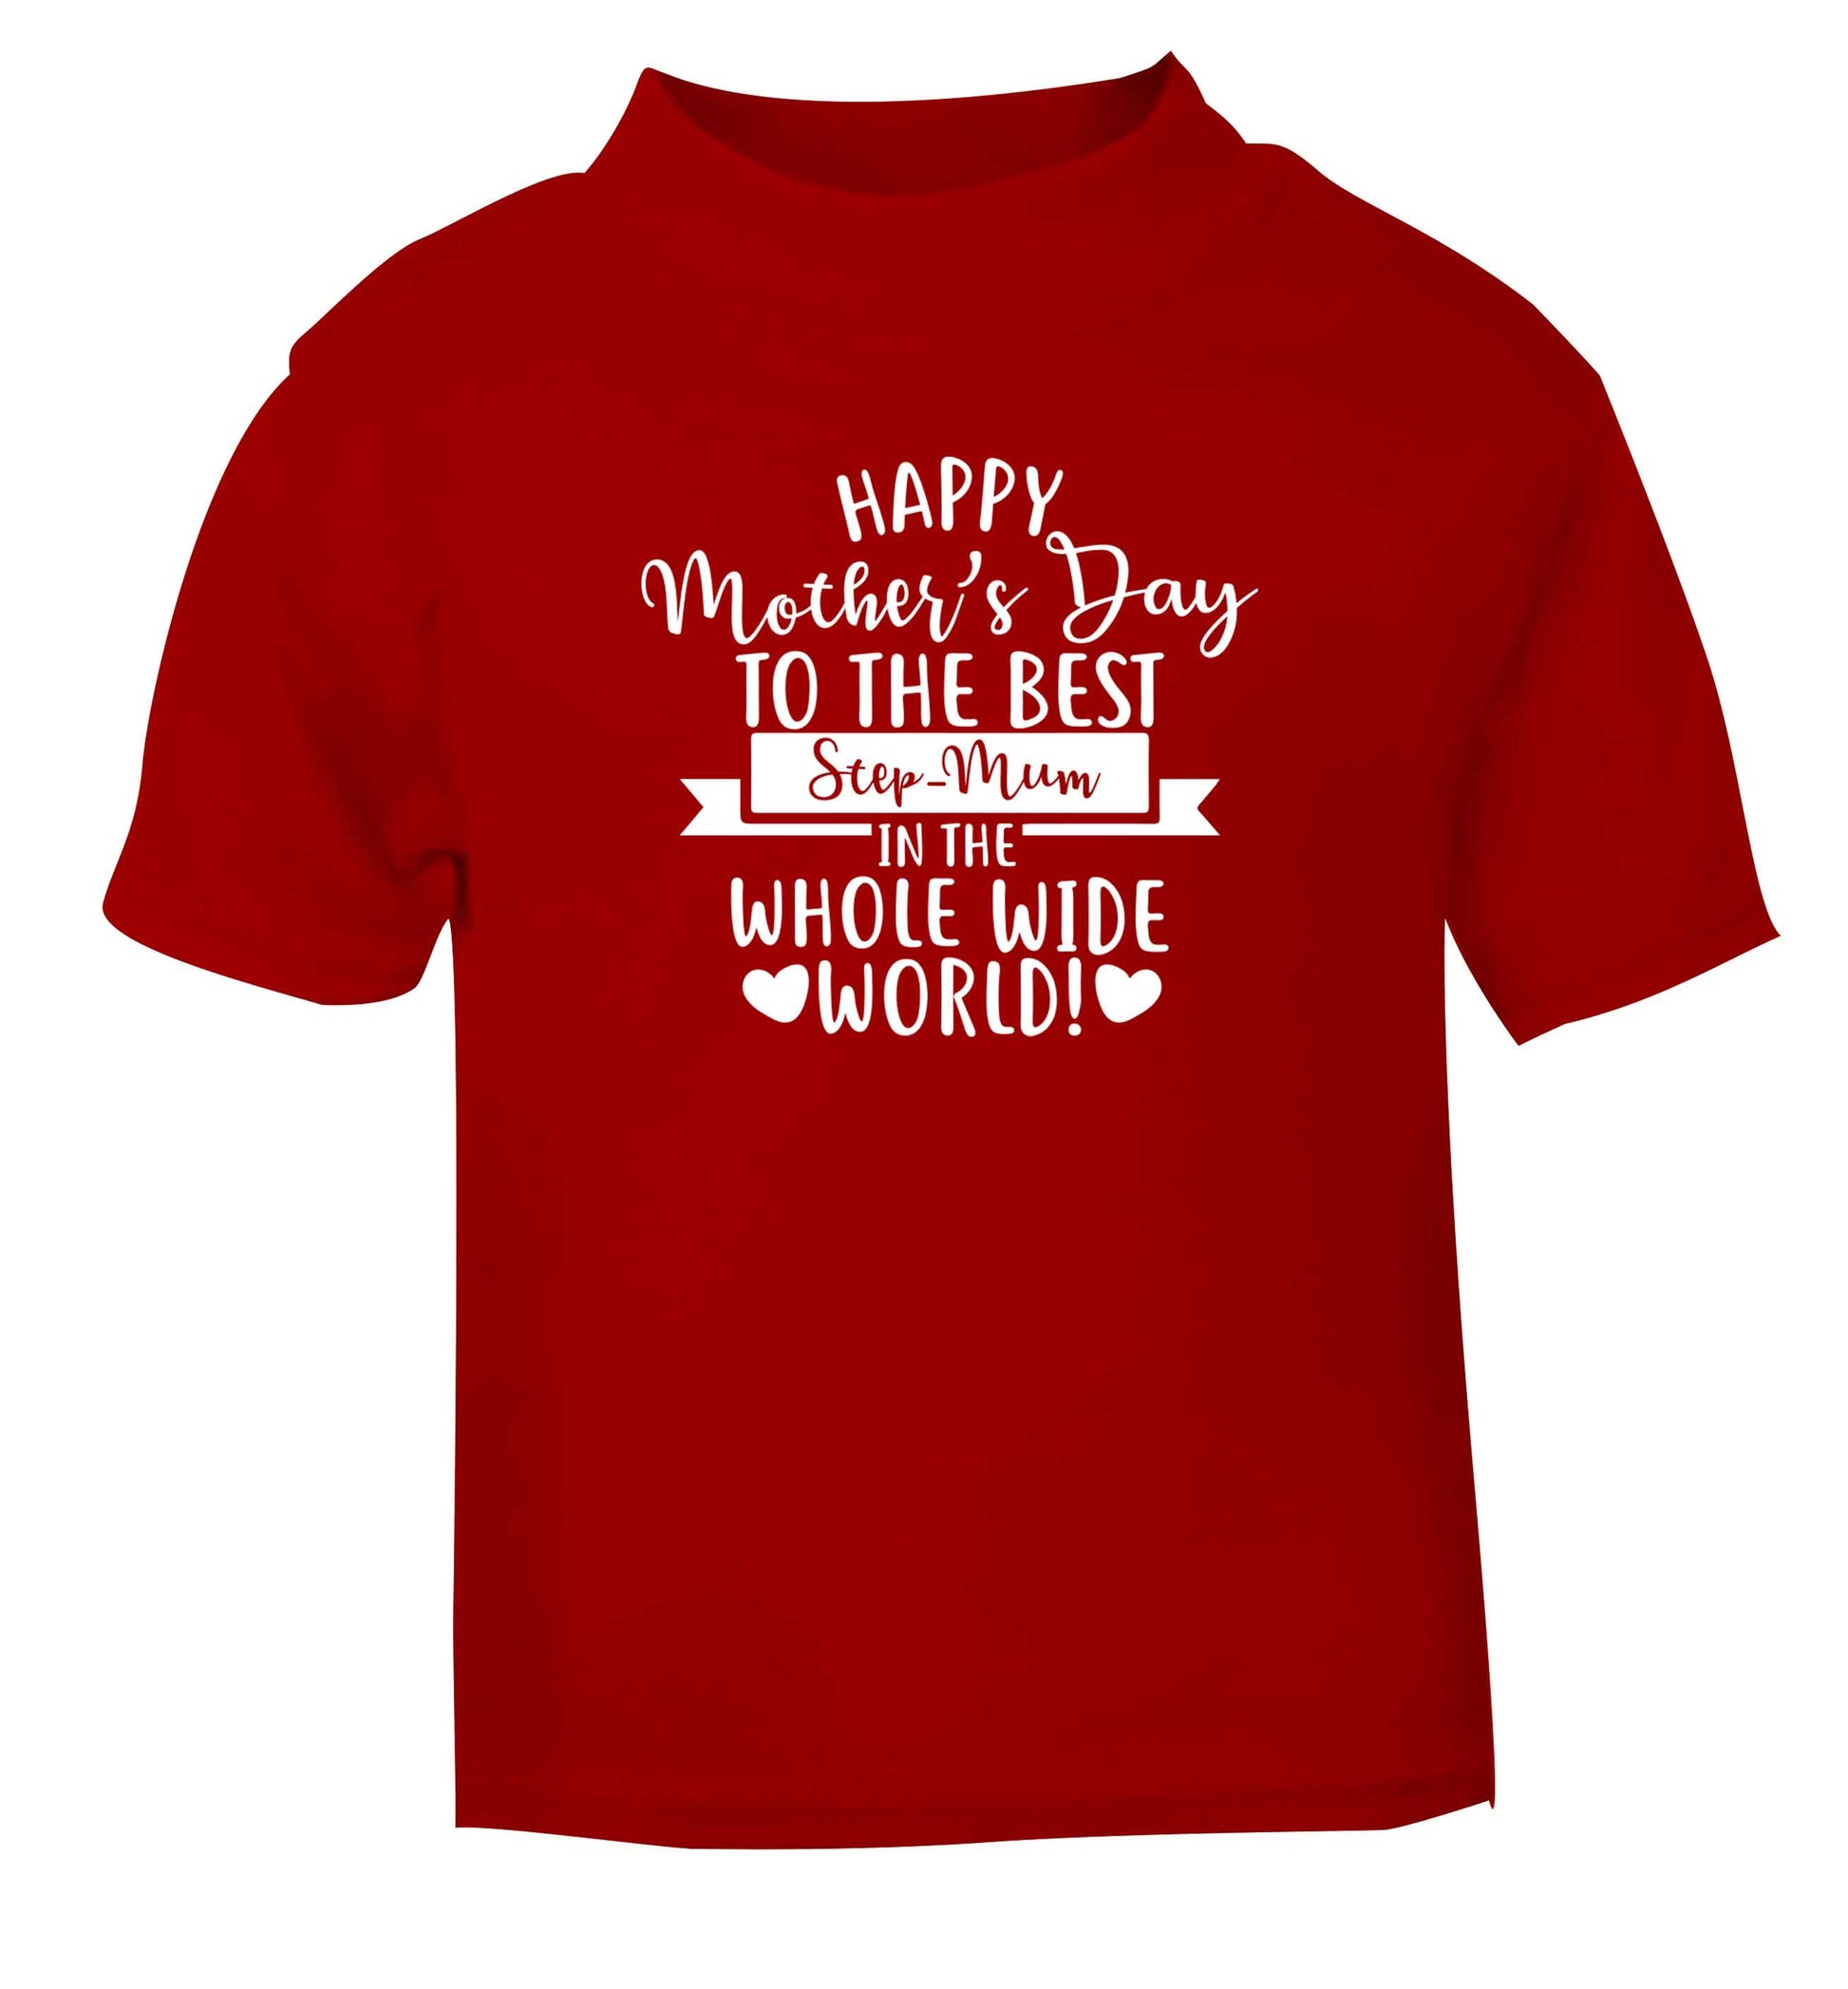 Happy mother's day to the best step-mum in the world red baby toddler Tshirt 2 Years